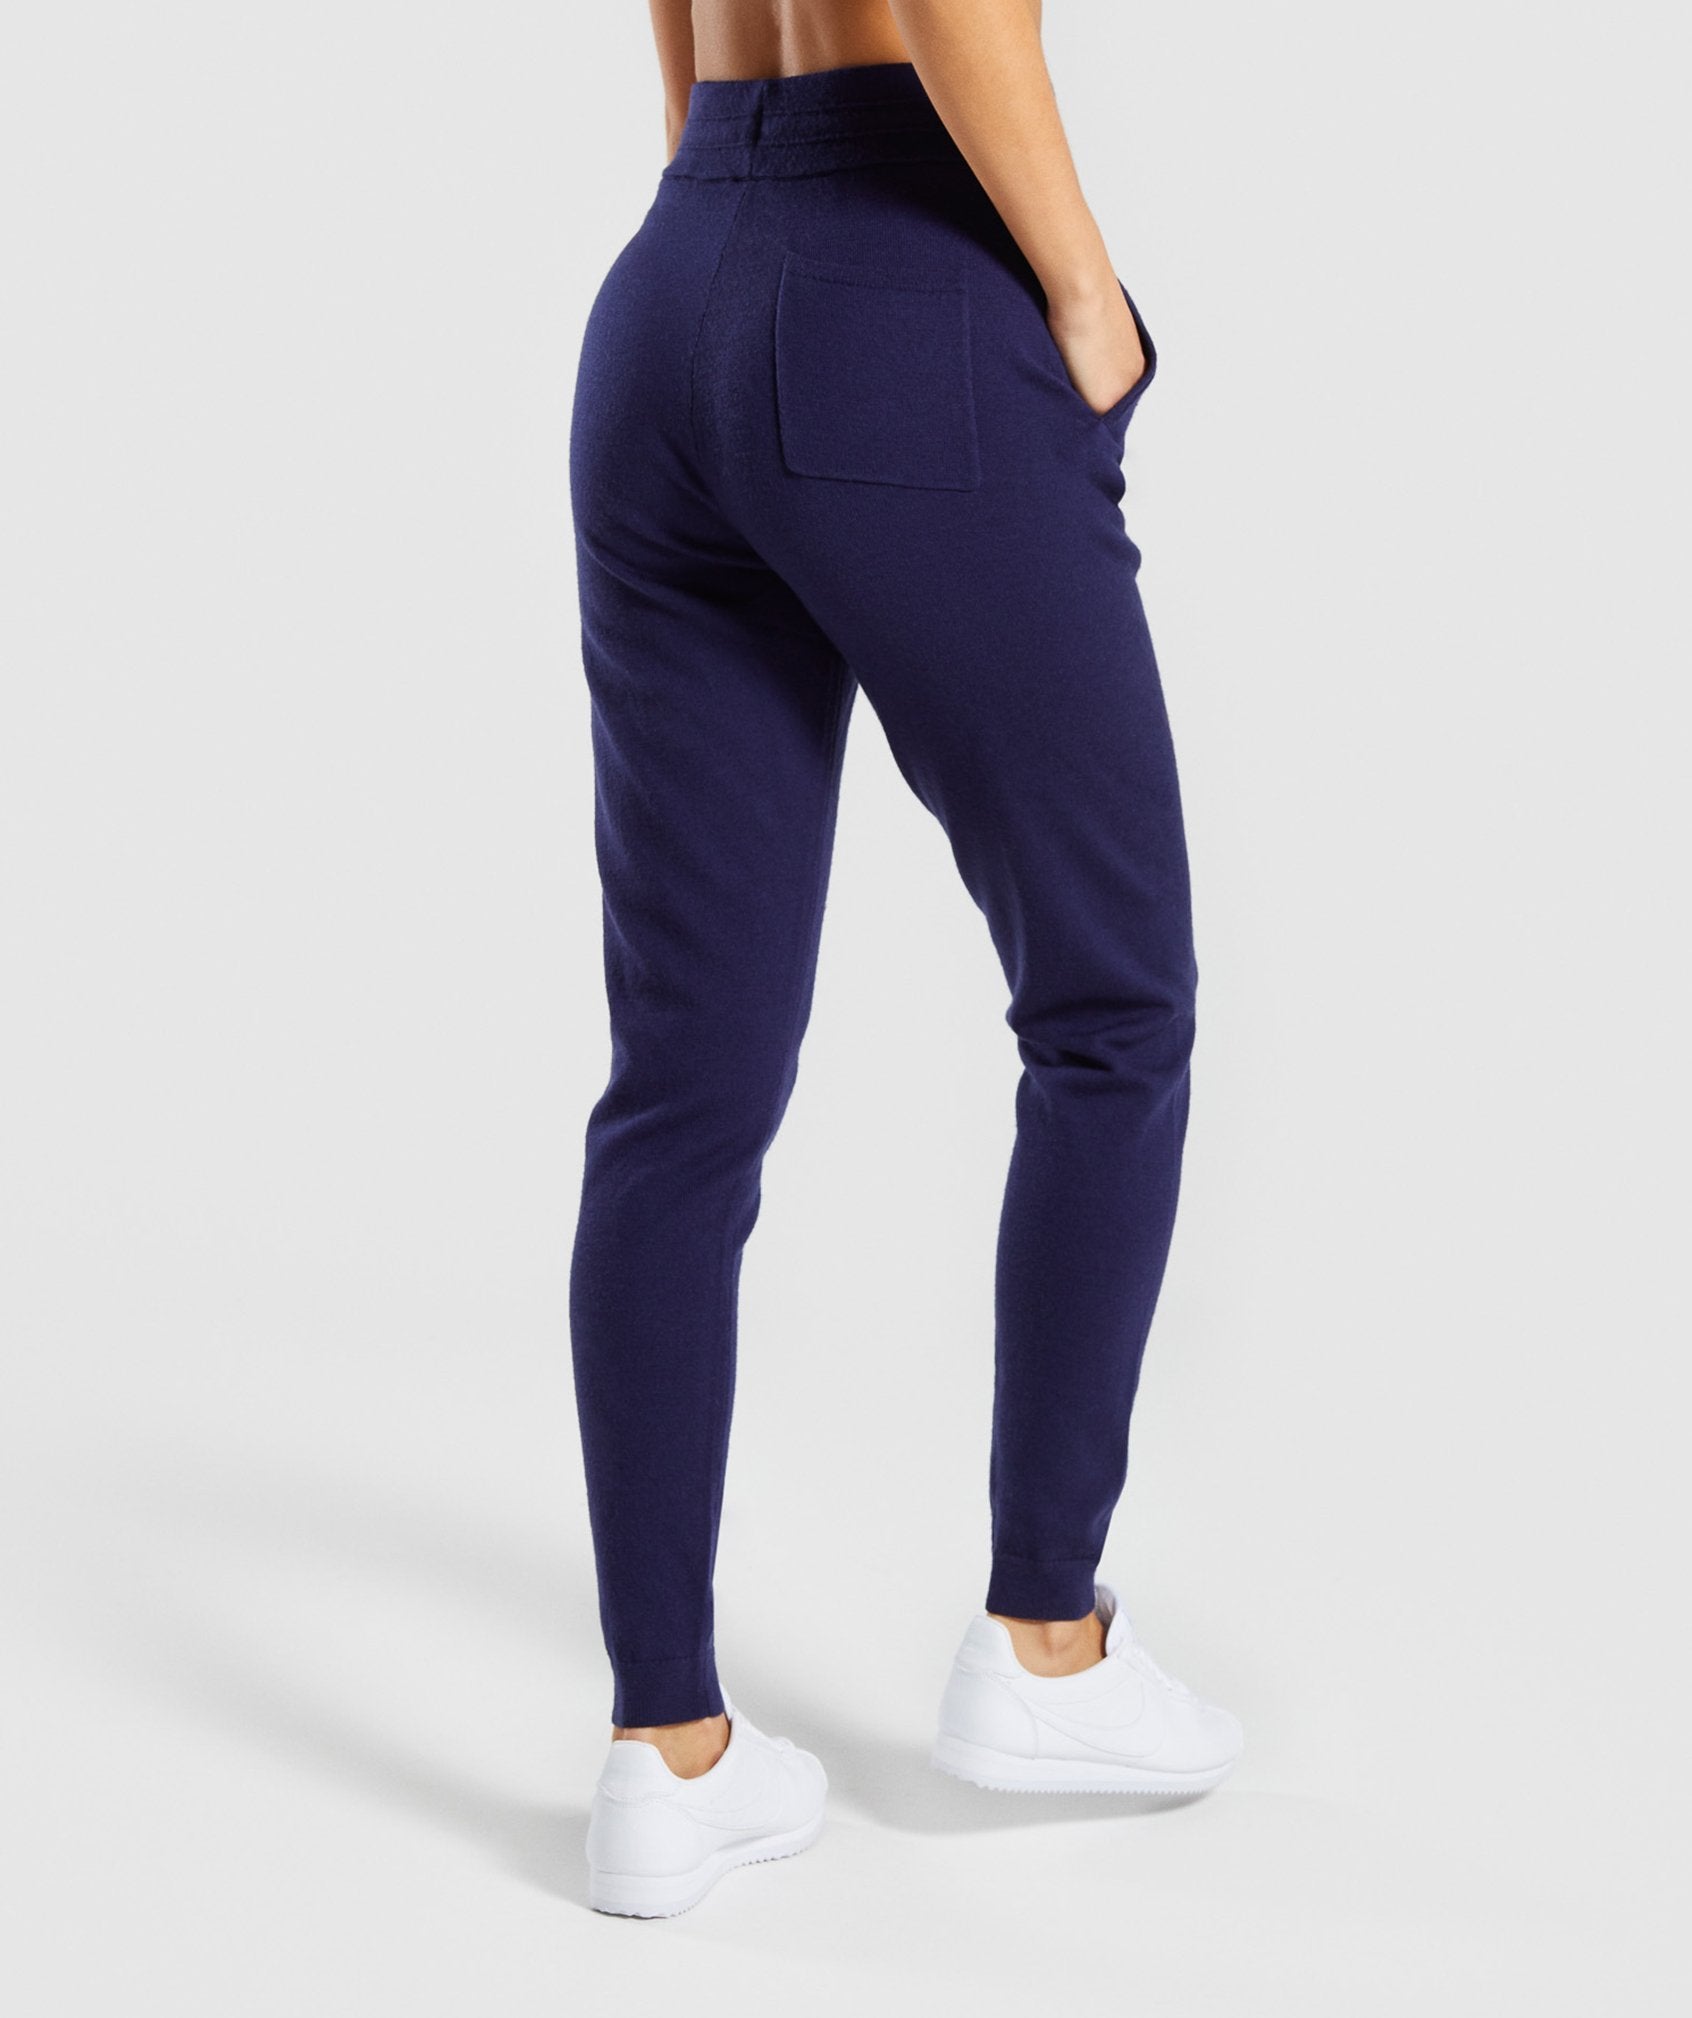 Isla Knit Jogger in Evening Navy Blue - view 2